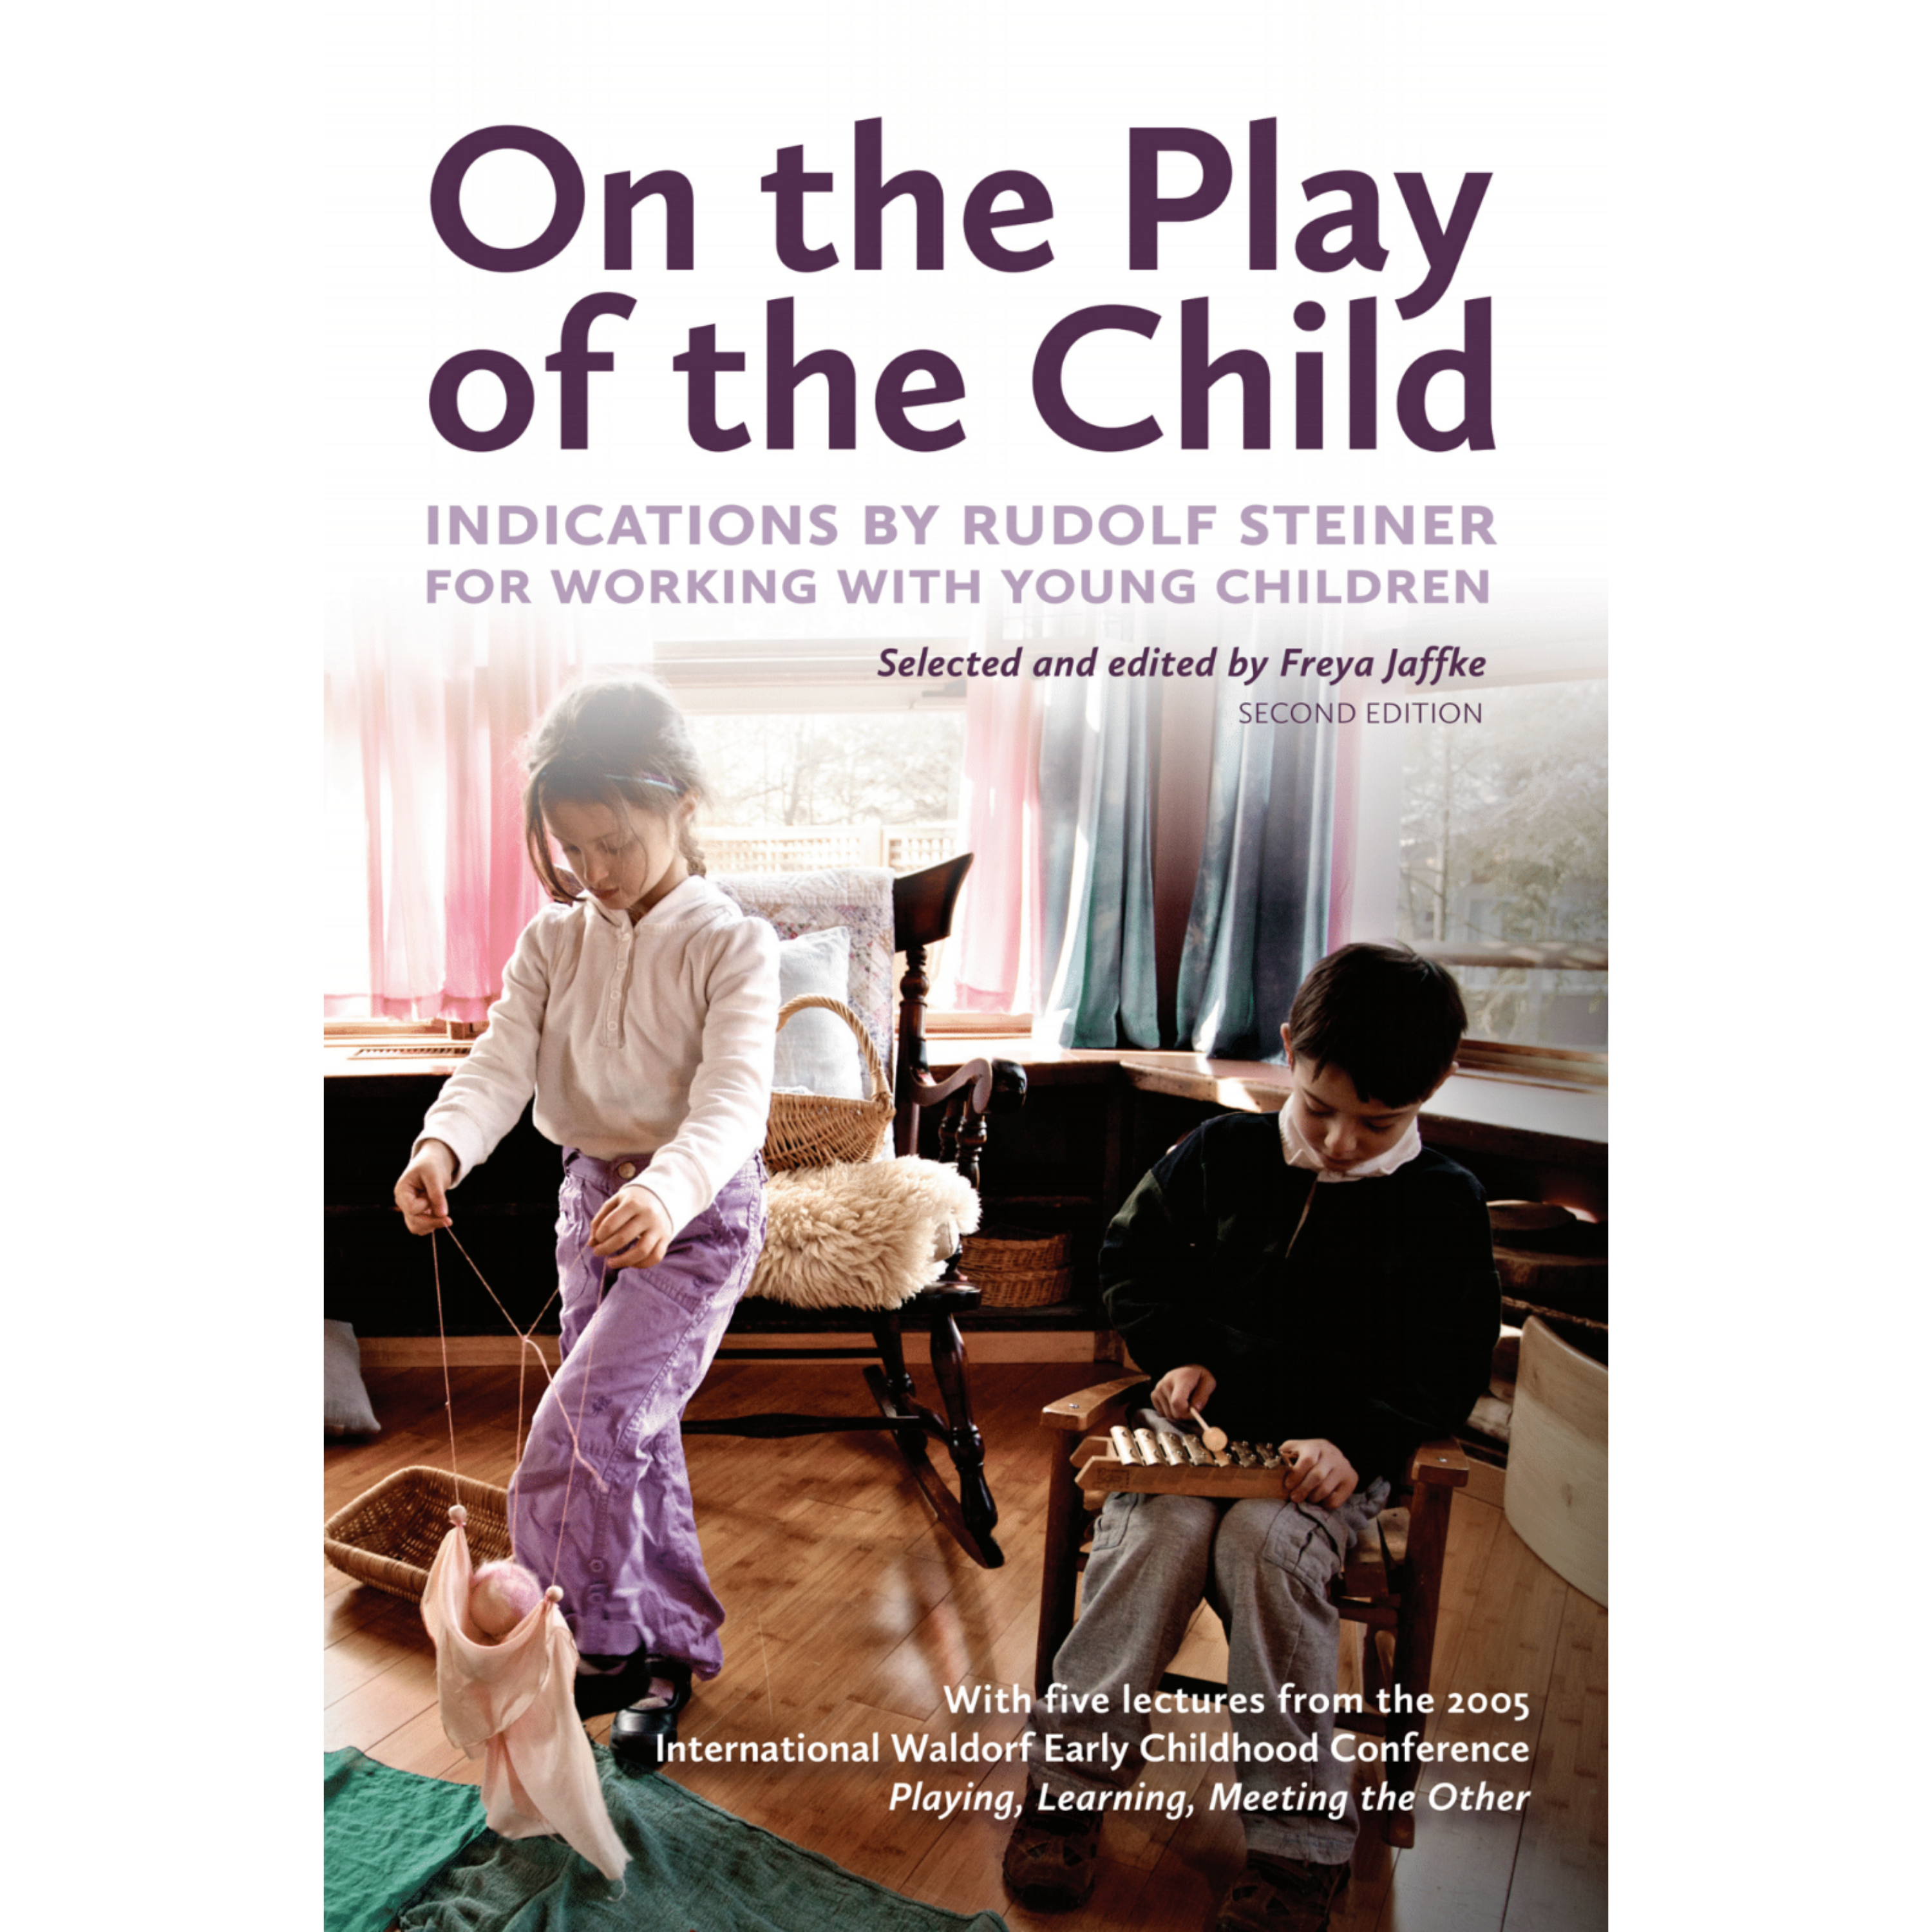 On the Play of the Child, Second Edition